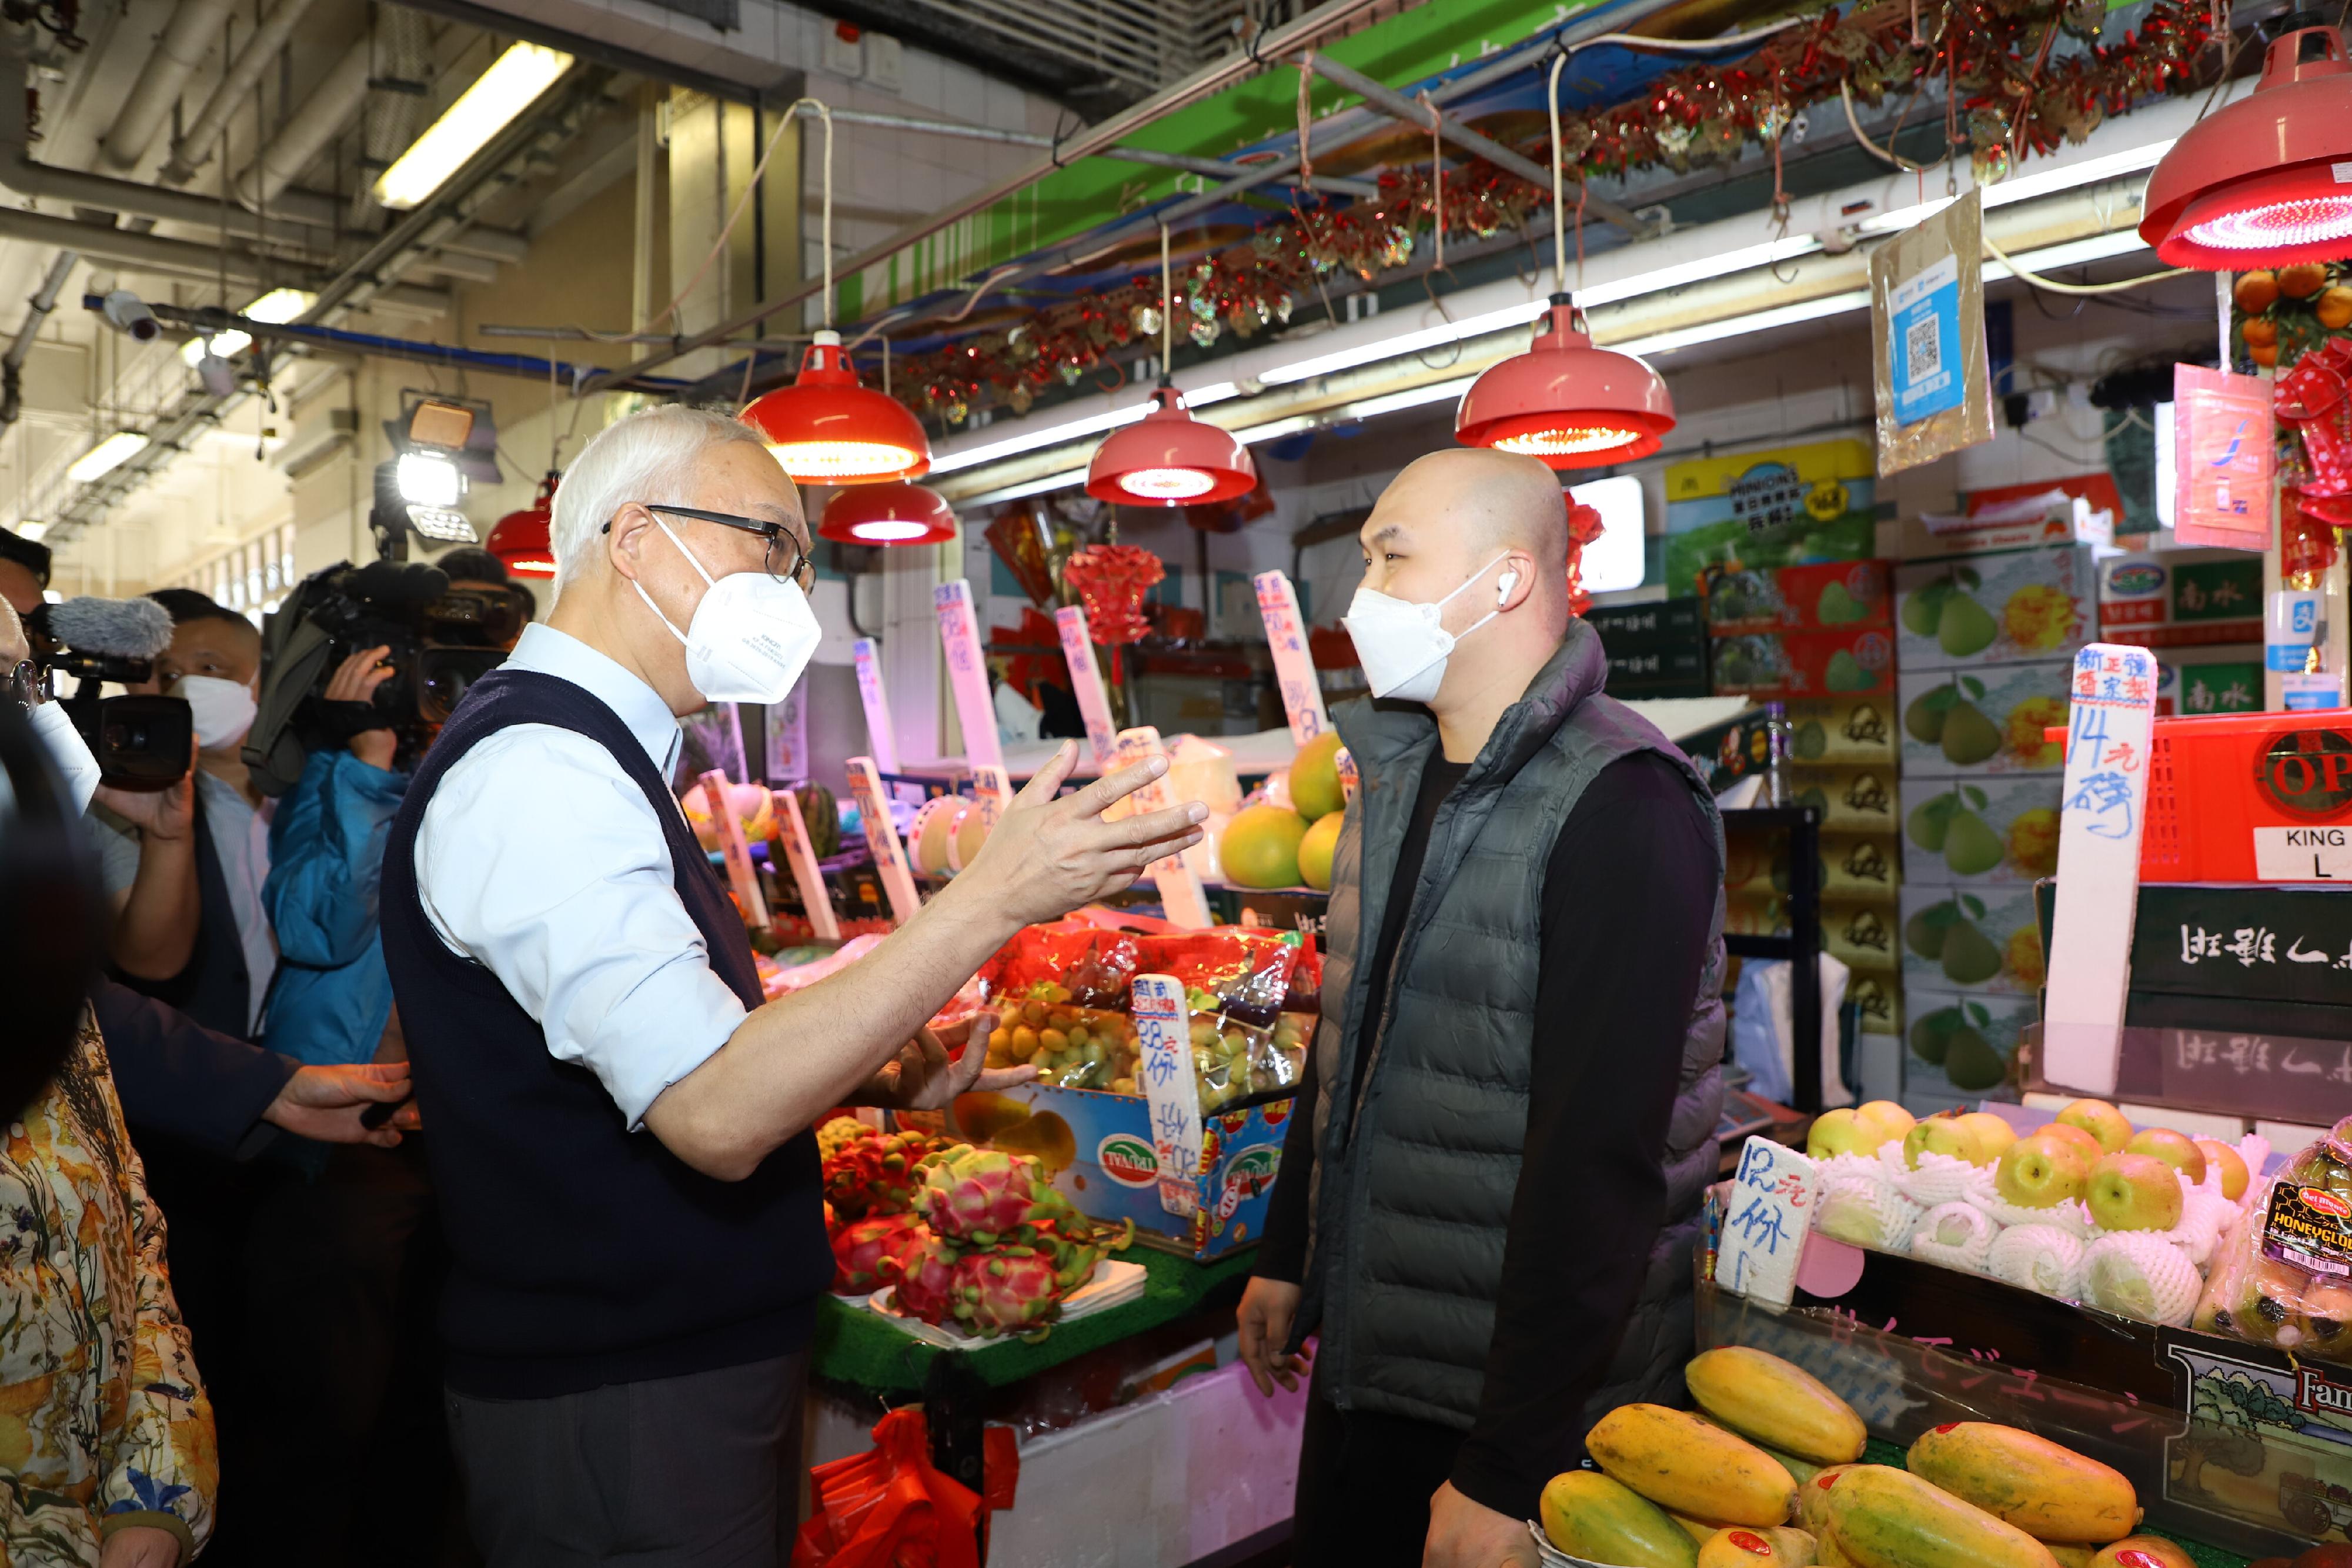 The Secretary for Environment and Ecology, Mr Tse Chin-wan, today (December 28) visited Tai Shing Street Market in Wong Tai Sin to brief media on the Cross-sectoral Territory-wide Anti-rodent Action and to inspect the anti-rodent work in the market. Photo shows Mr Tse (left) talking to a vendor to learn more about the hygiene condition of the market.